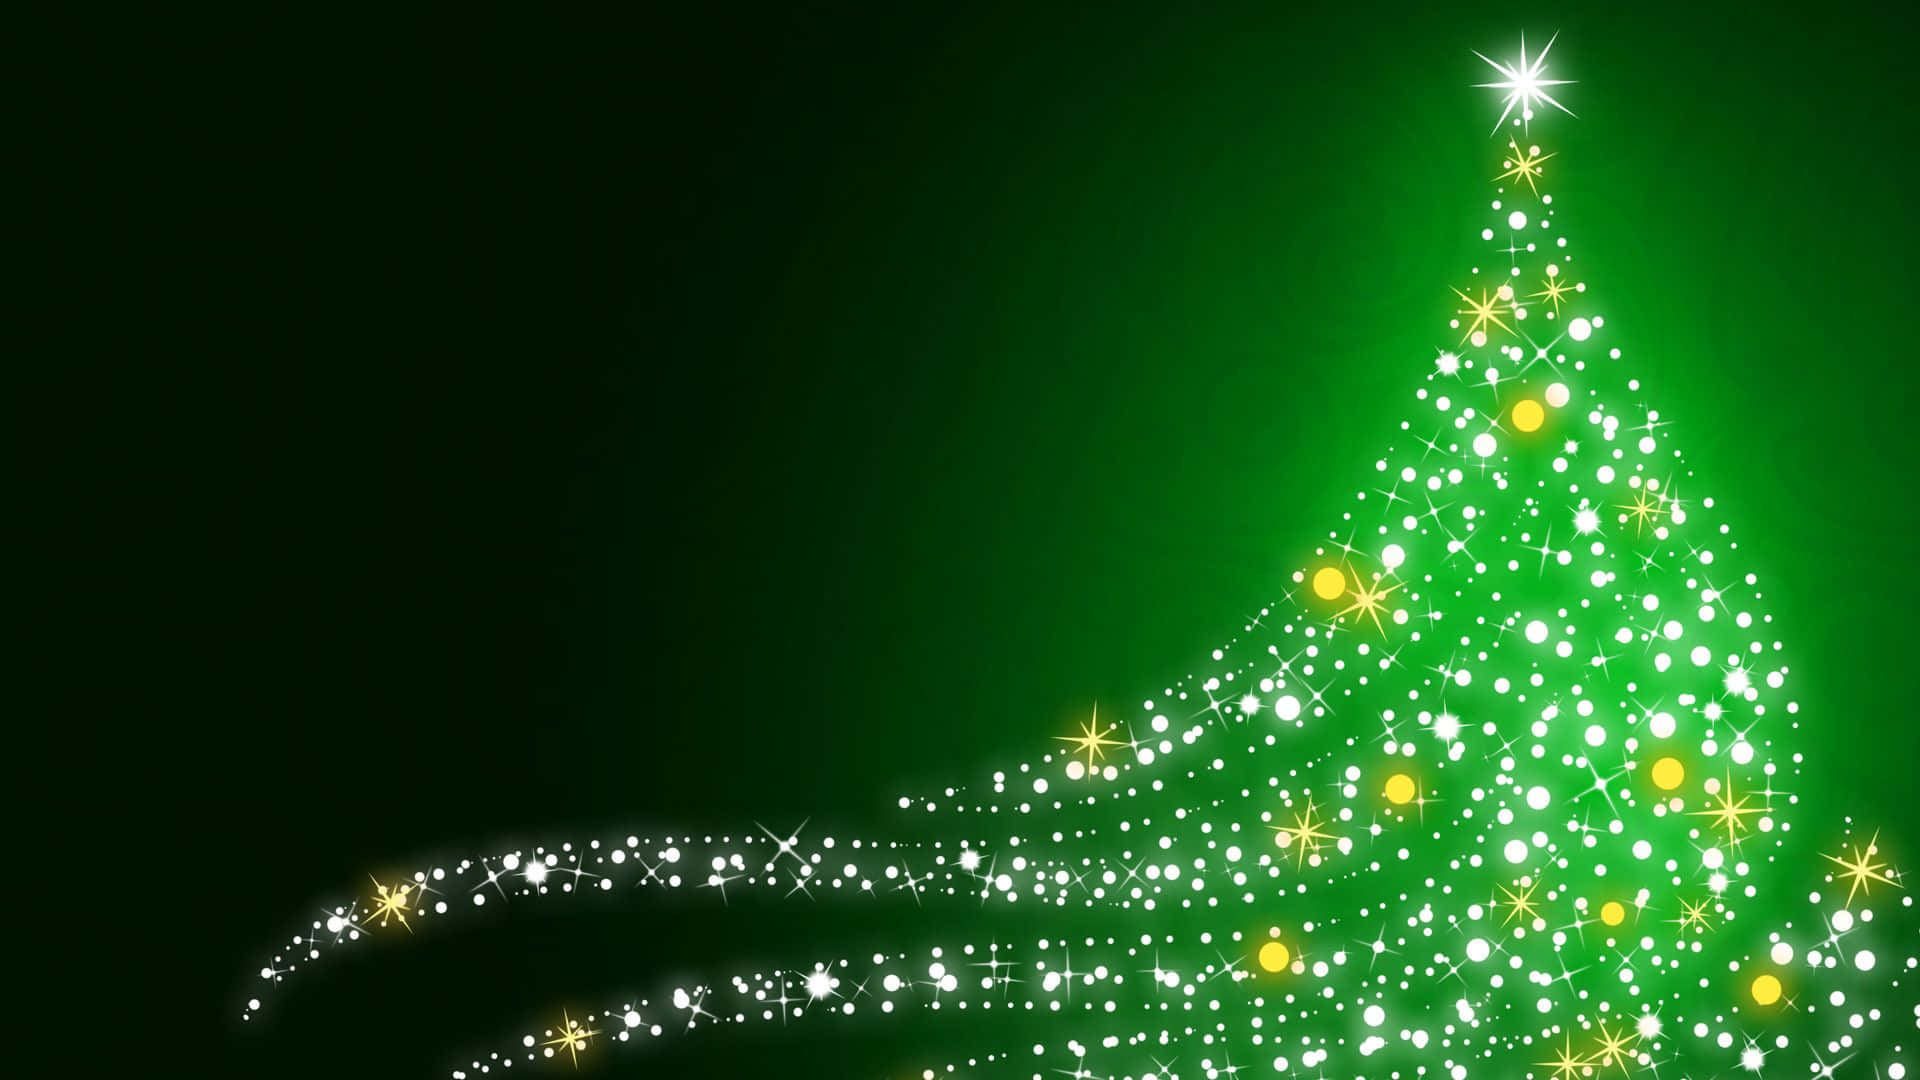 A Green Christmas Tree With Stars On A Black Background